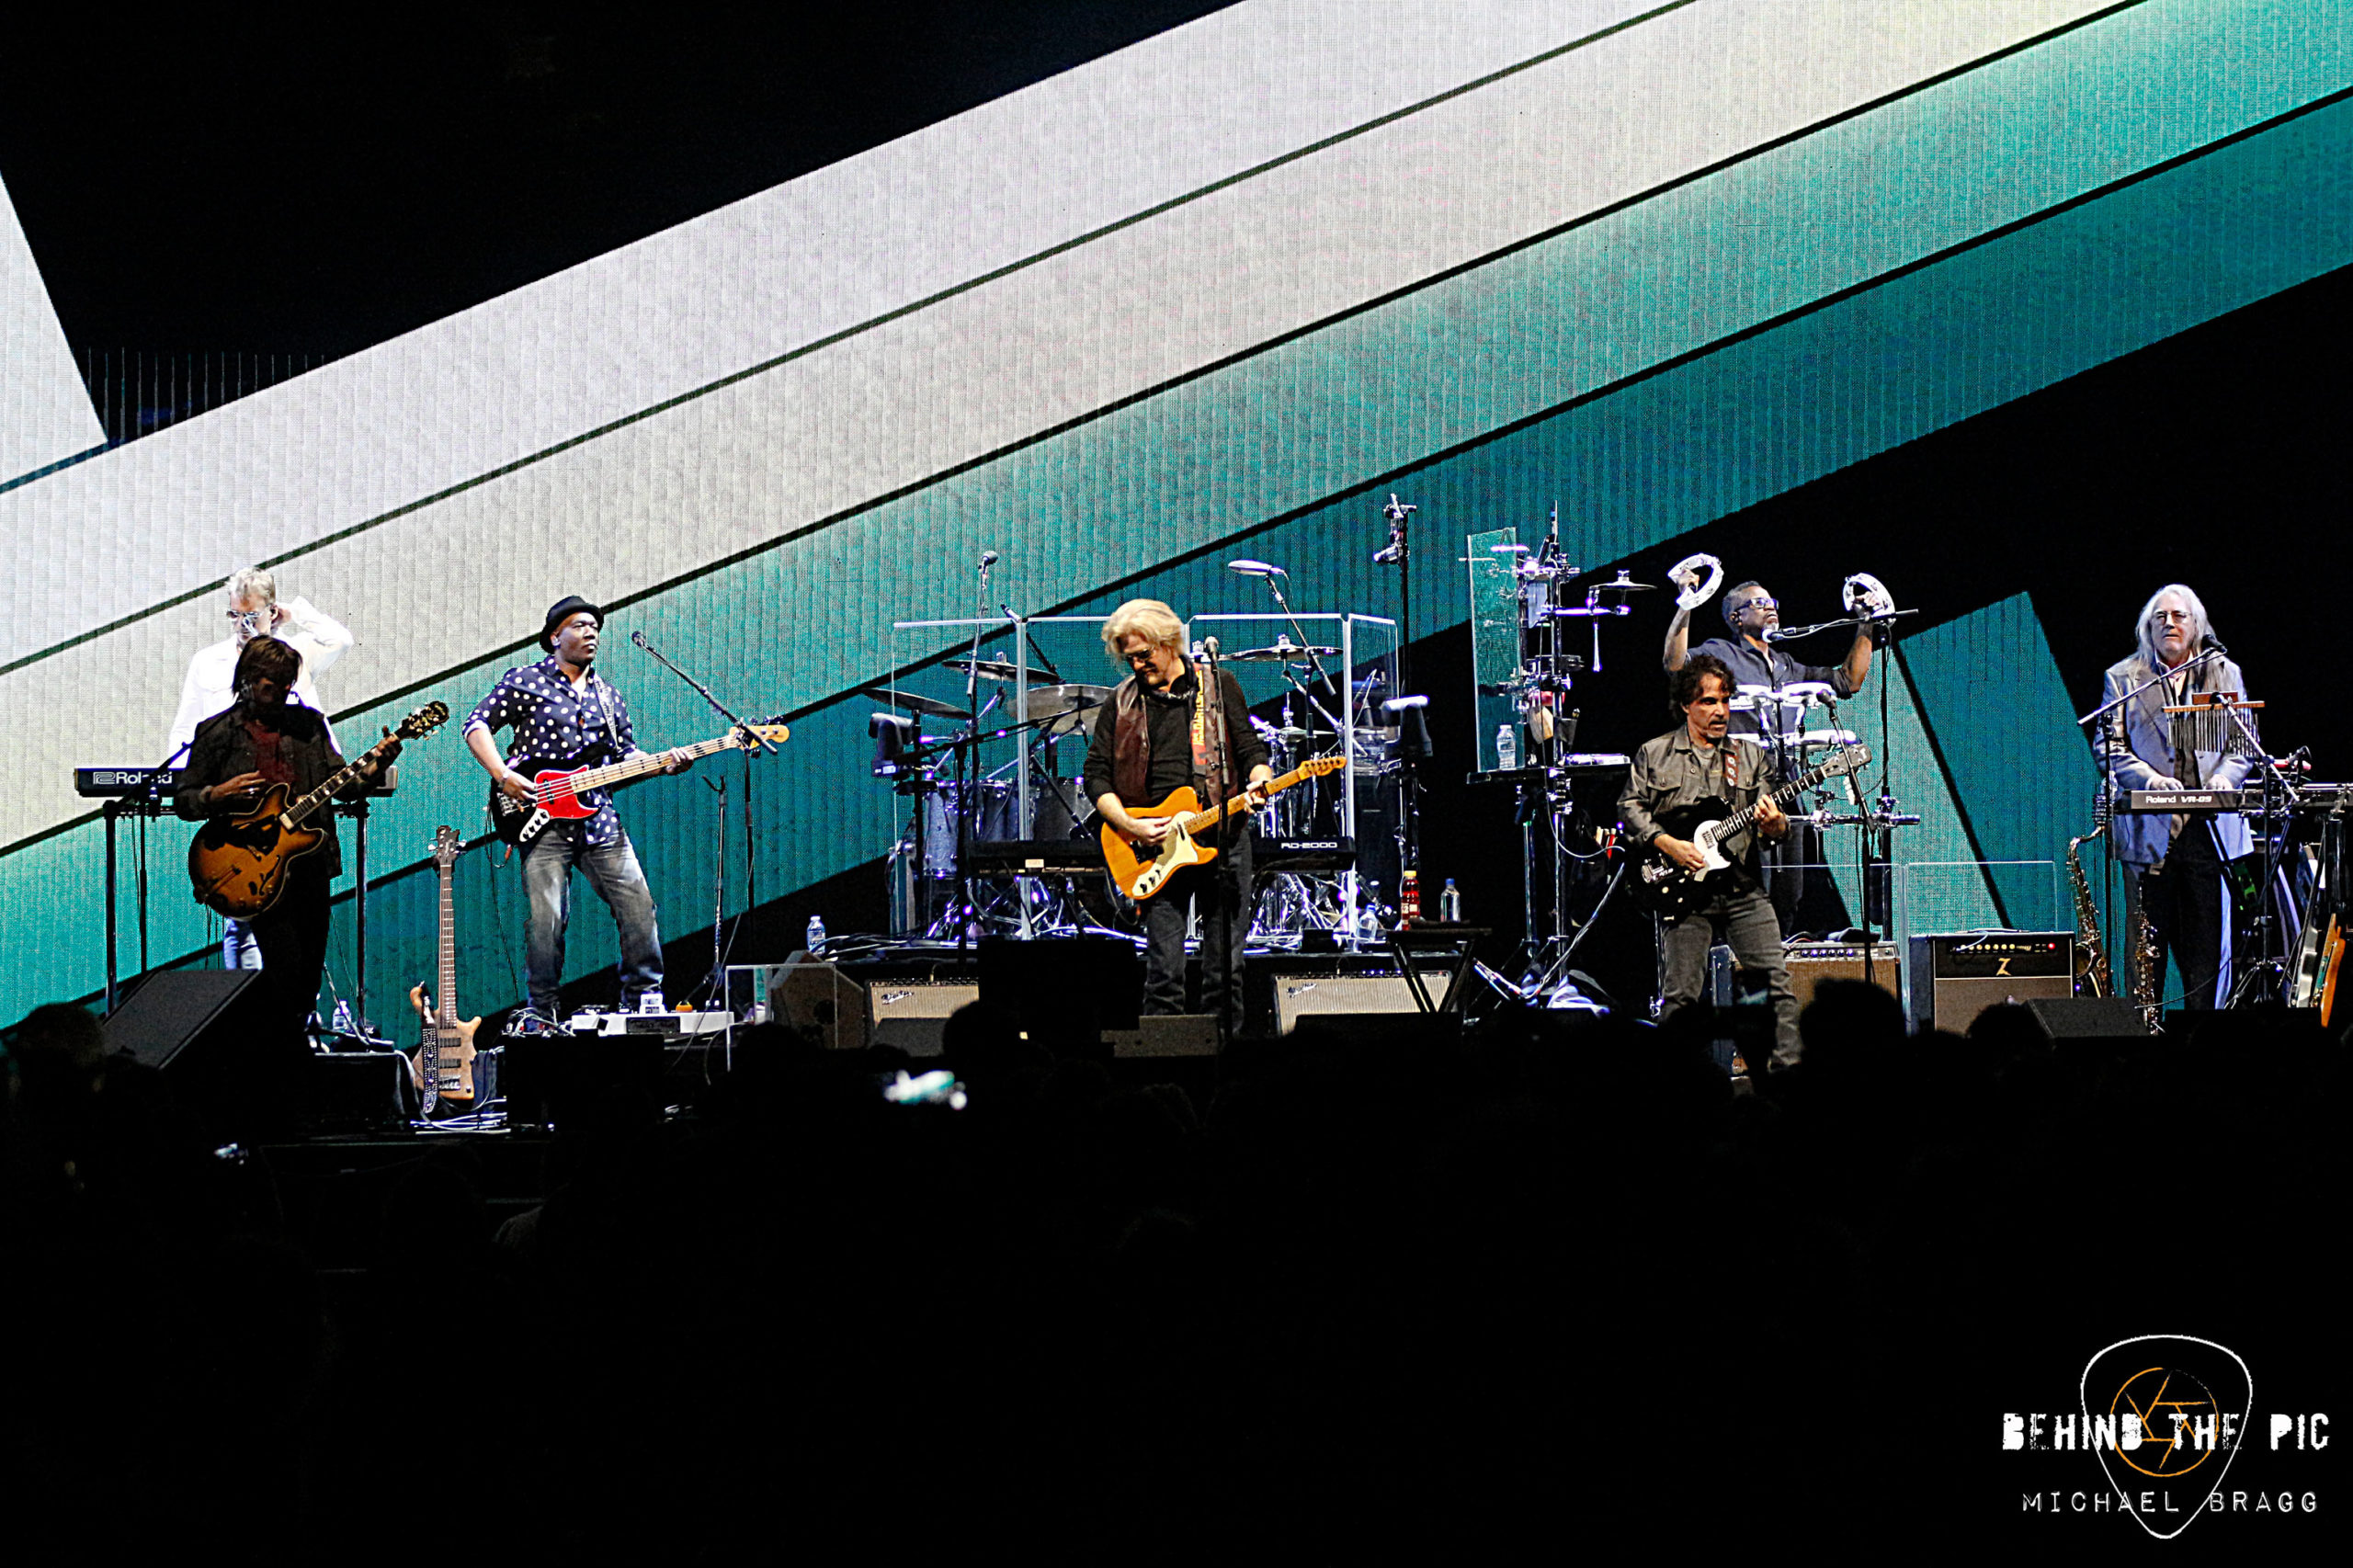 Hall and Oates at Spectrum Center in Charlotte North Carolina